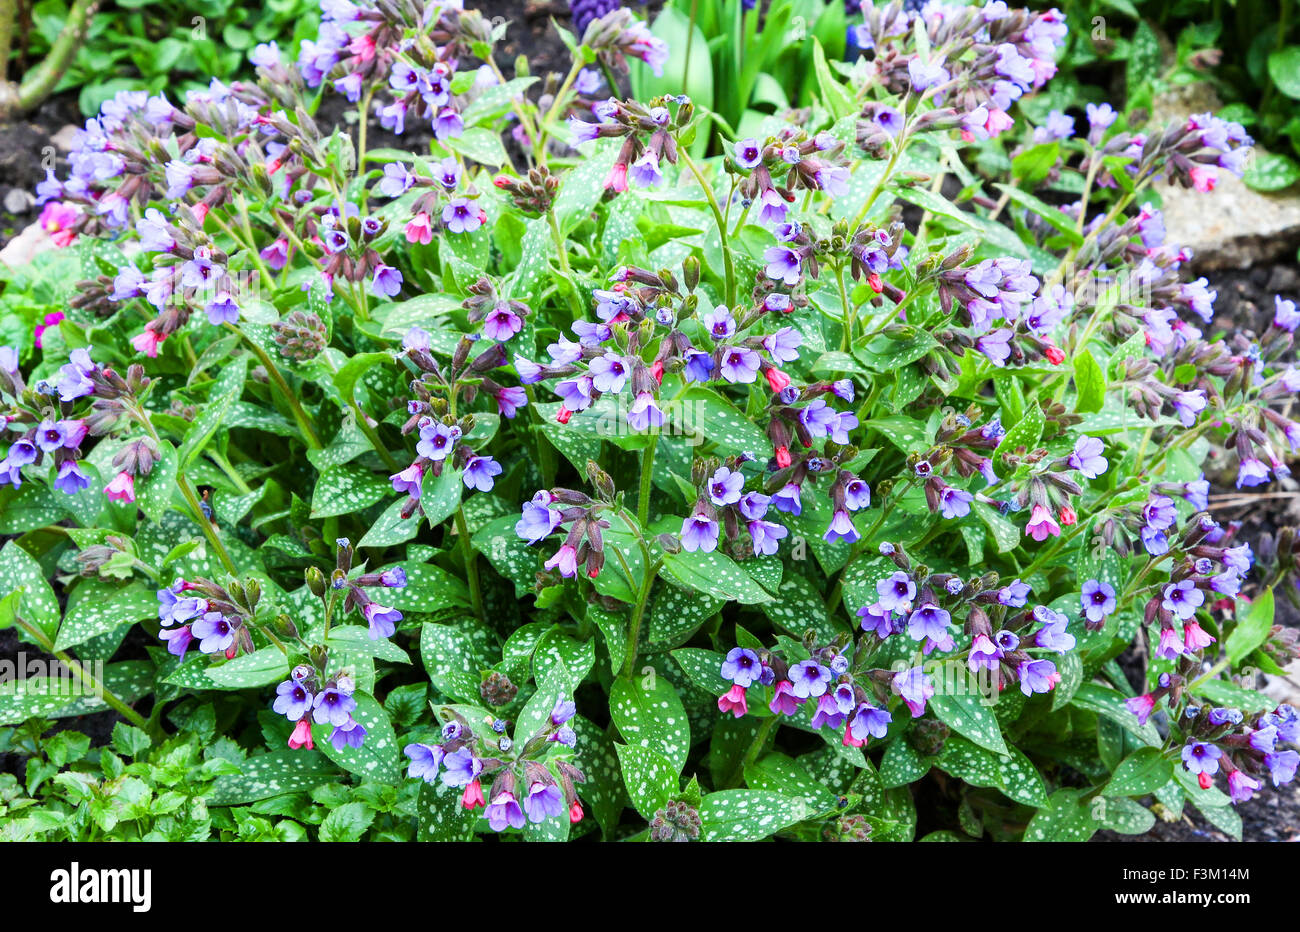 Early spring flowers and spotted leaves of the Lungwort (Pulmonaria saccharate) 'Trevi Fountain' Stock Photo